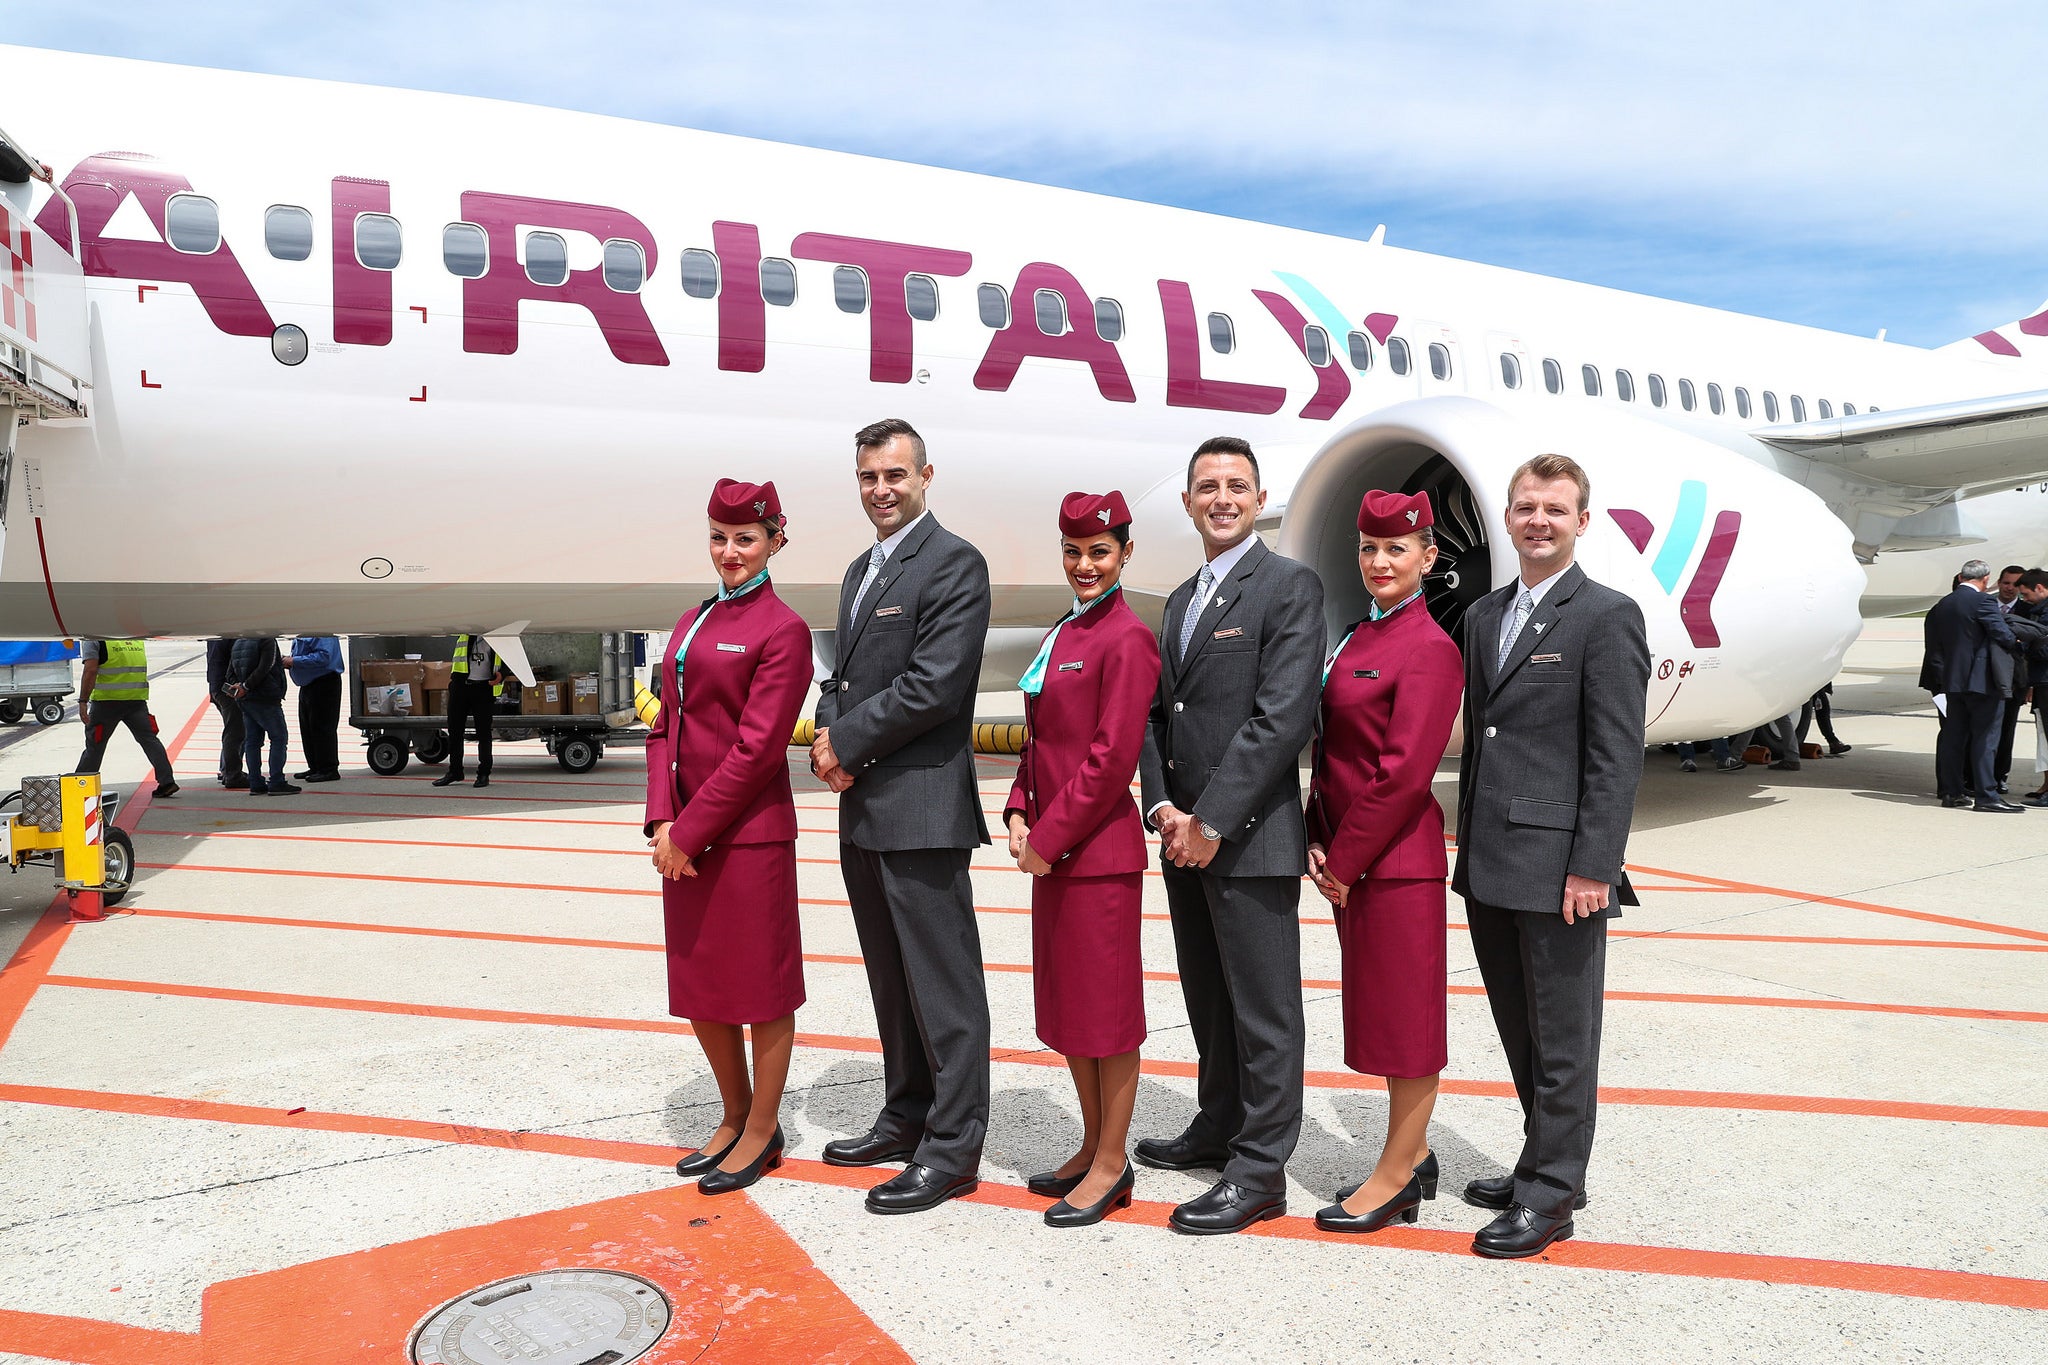 Air Italy crew members pose in front of an Air Italy aircraft.